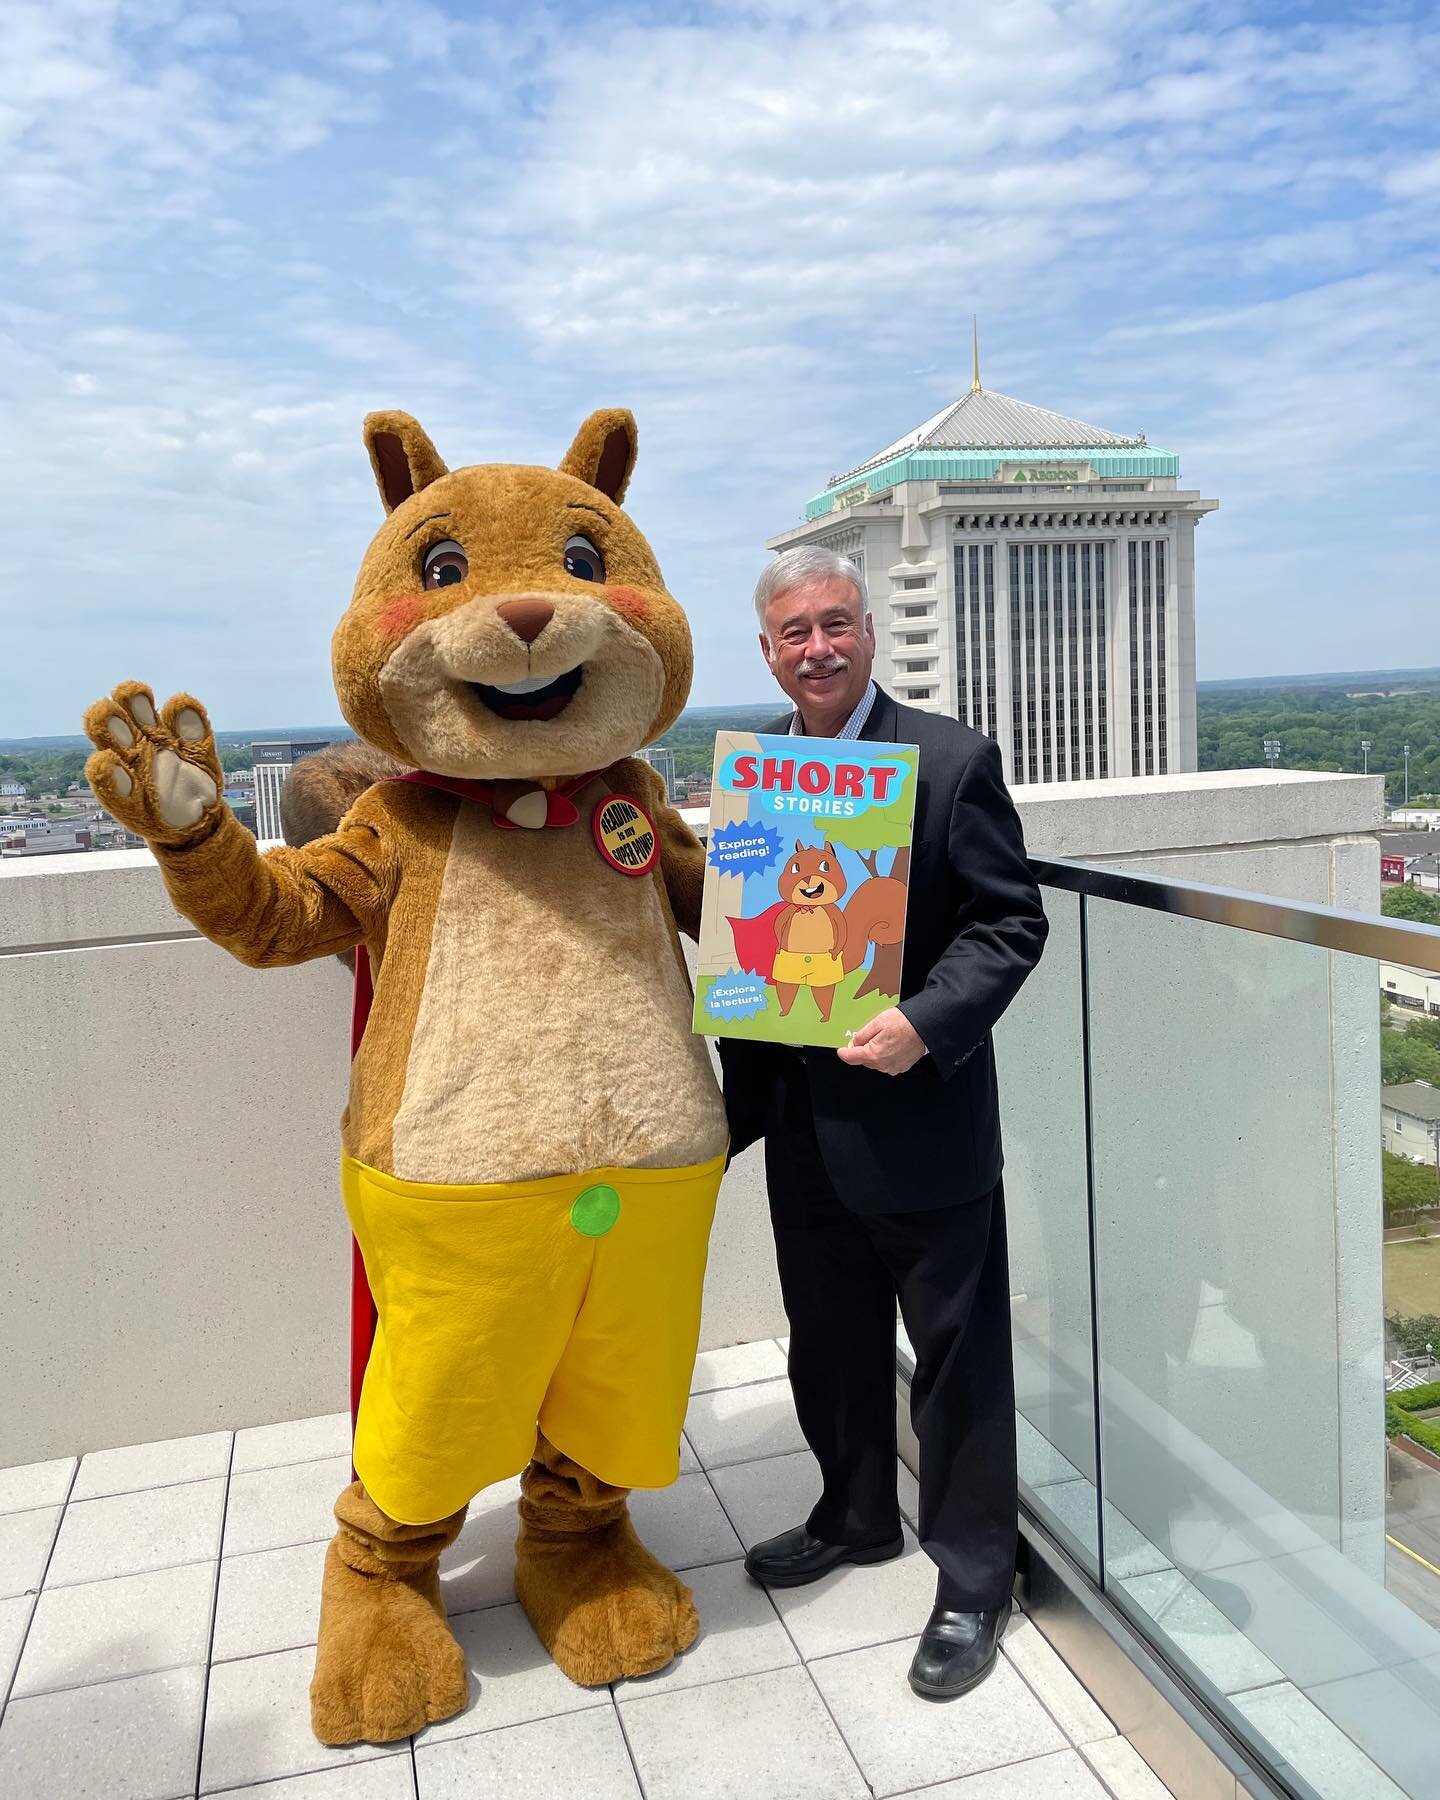 Our team at SHORT The Squirrel would like to shine a spotlight on Joseph Borg, Former Director of Alabama Securities Commission!✨💛 

Former Director Borg has been instrumental in getting financial literacy throughout the state, including partnering 